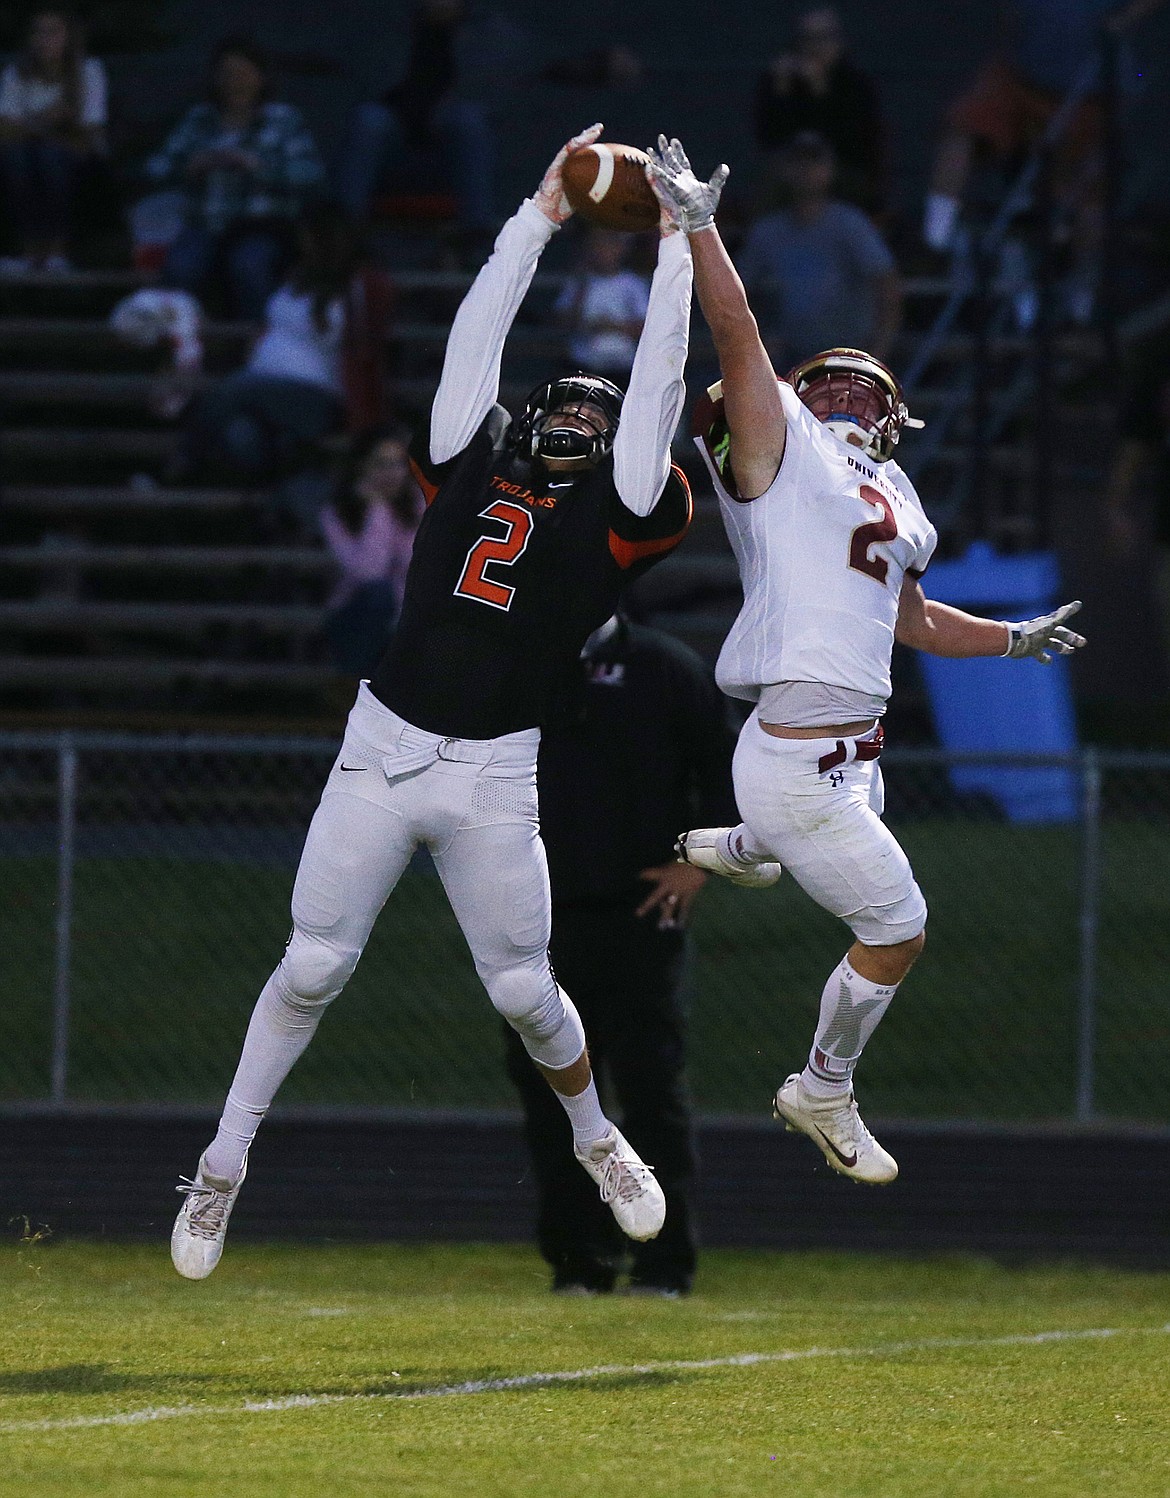 Post Falls wide receiver Jacob Rutherford catches a deep pass in front of University's Blake Tellinghusen during Friday night's game in Post Falls. (LOREN BENOIT/Press)